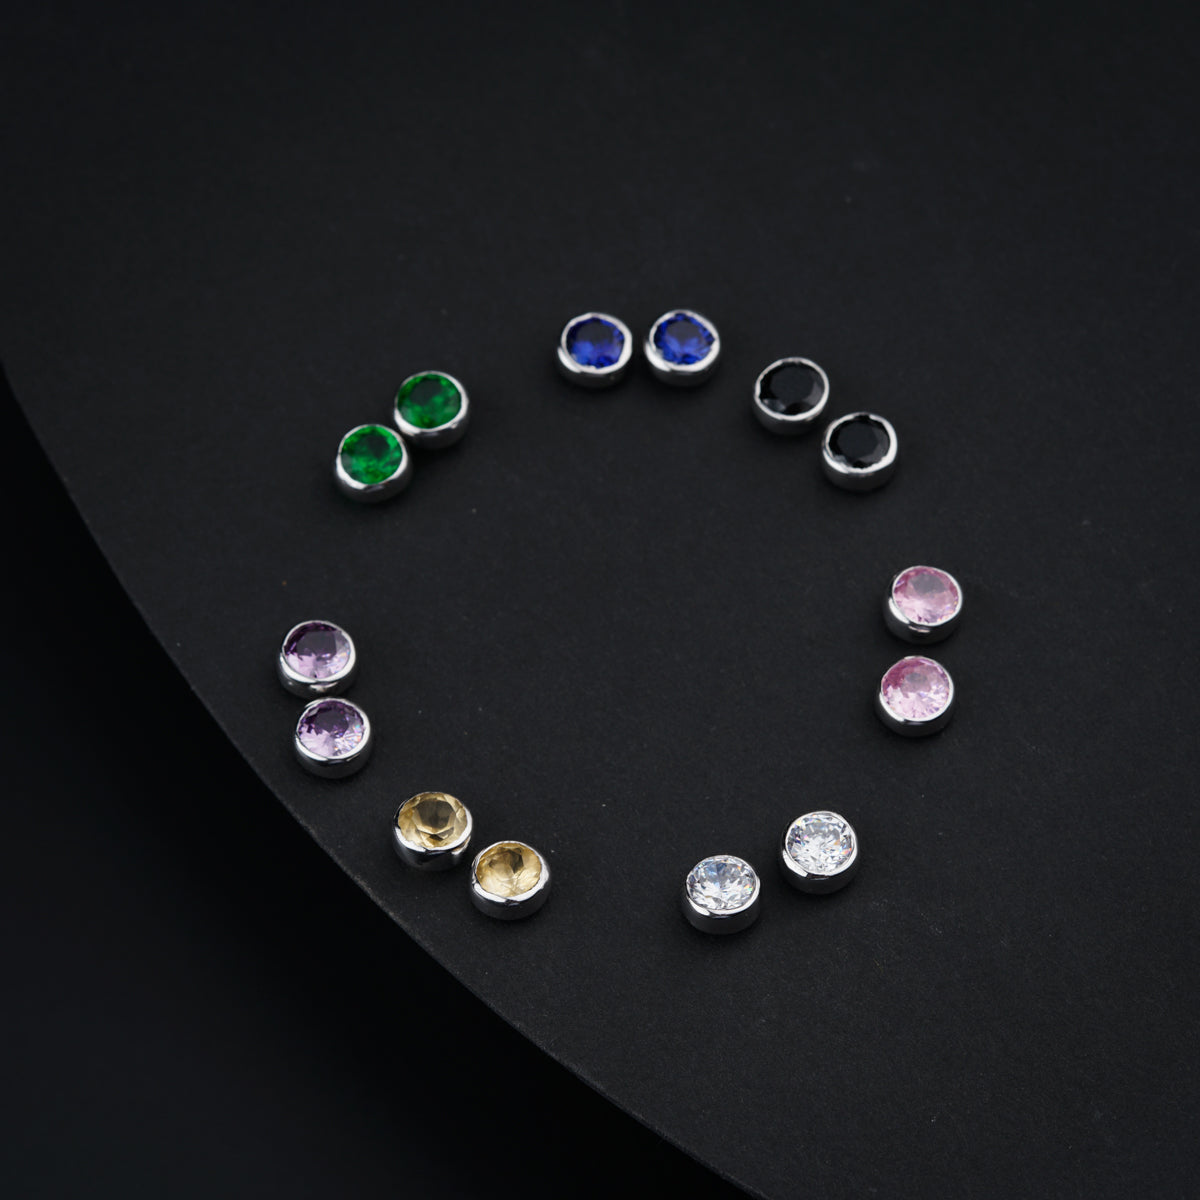 a circle of different colored stones on a black surface